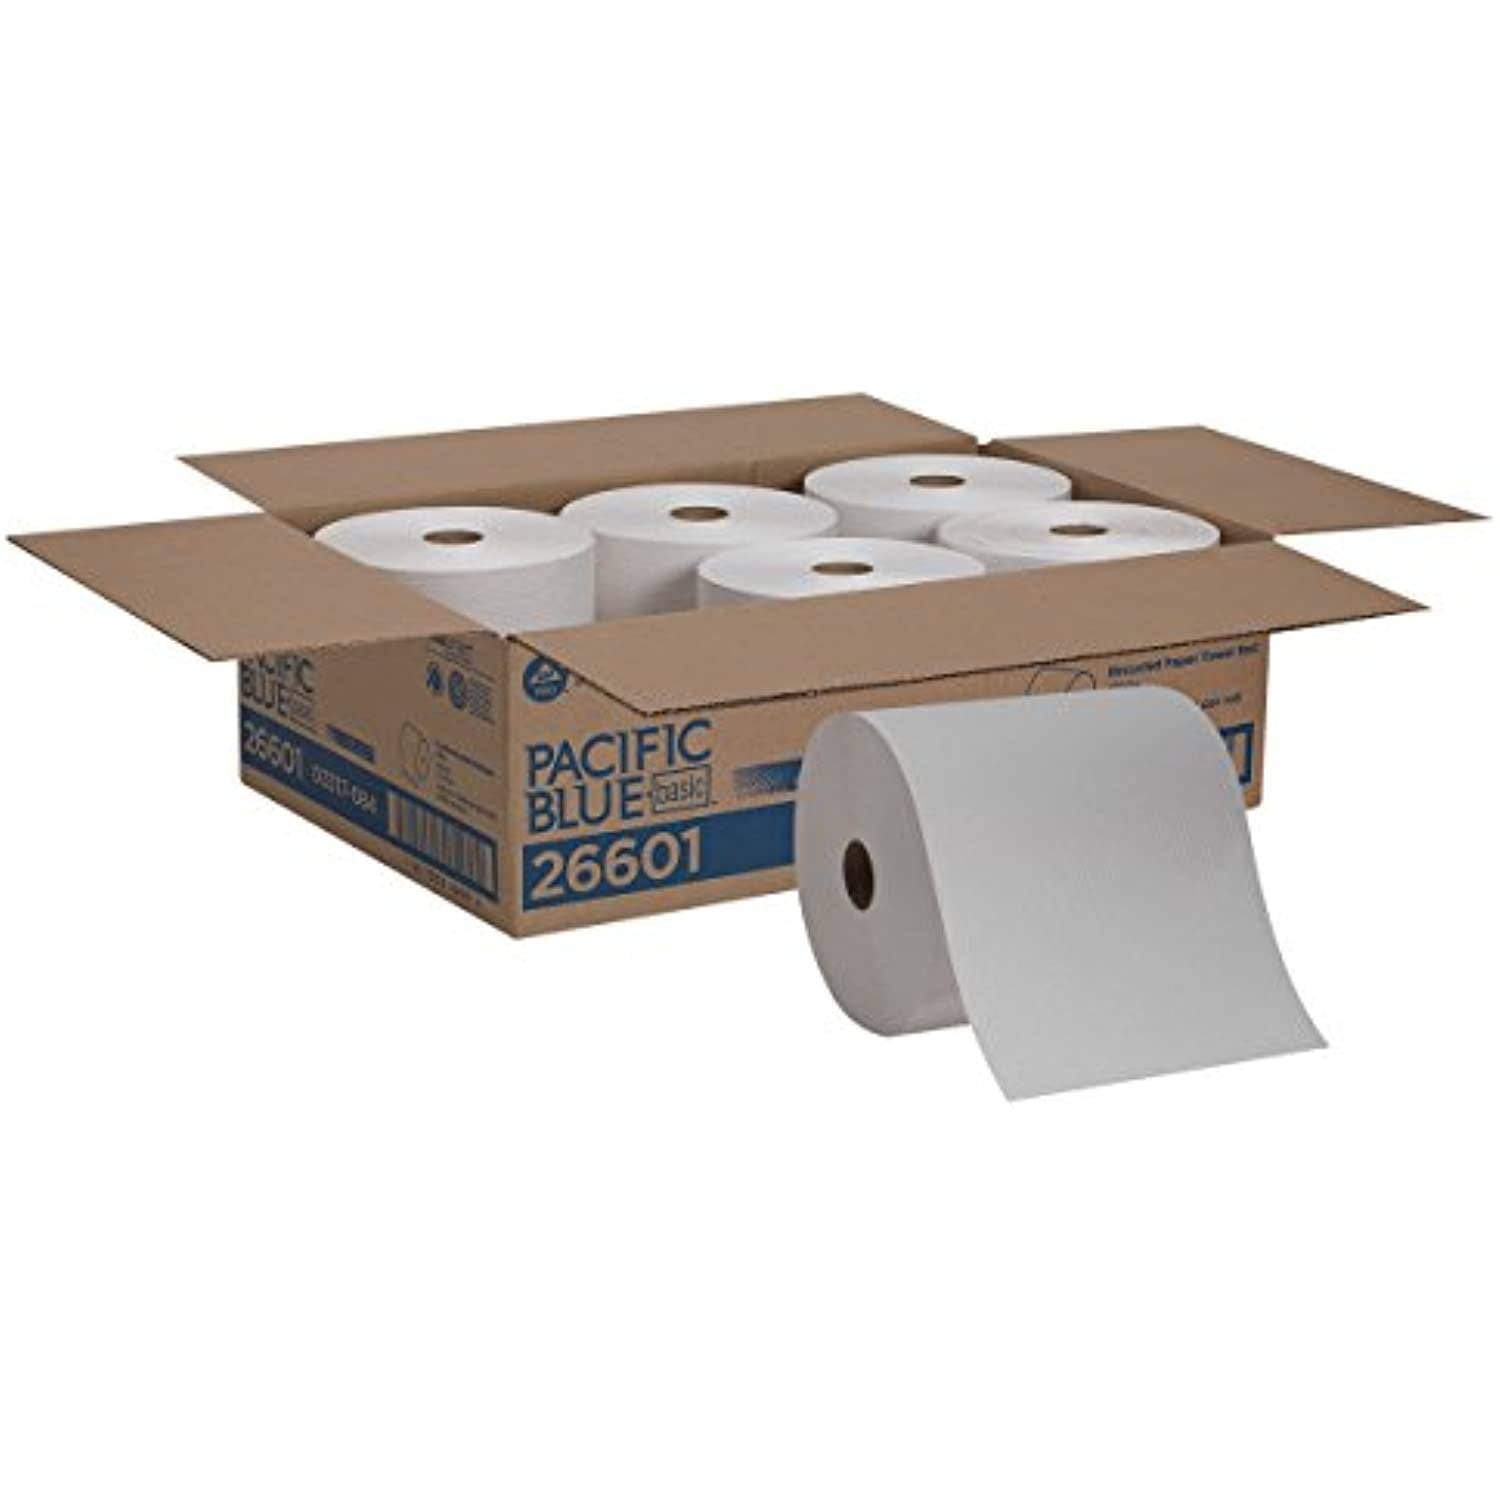 Pacific Blue Basic Recycled Paper Towel Rolls (Previously Branded ...